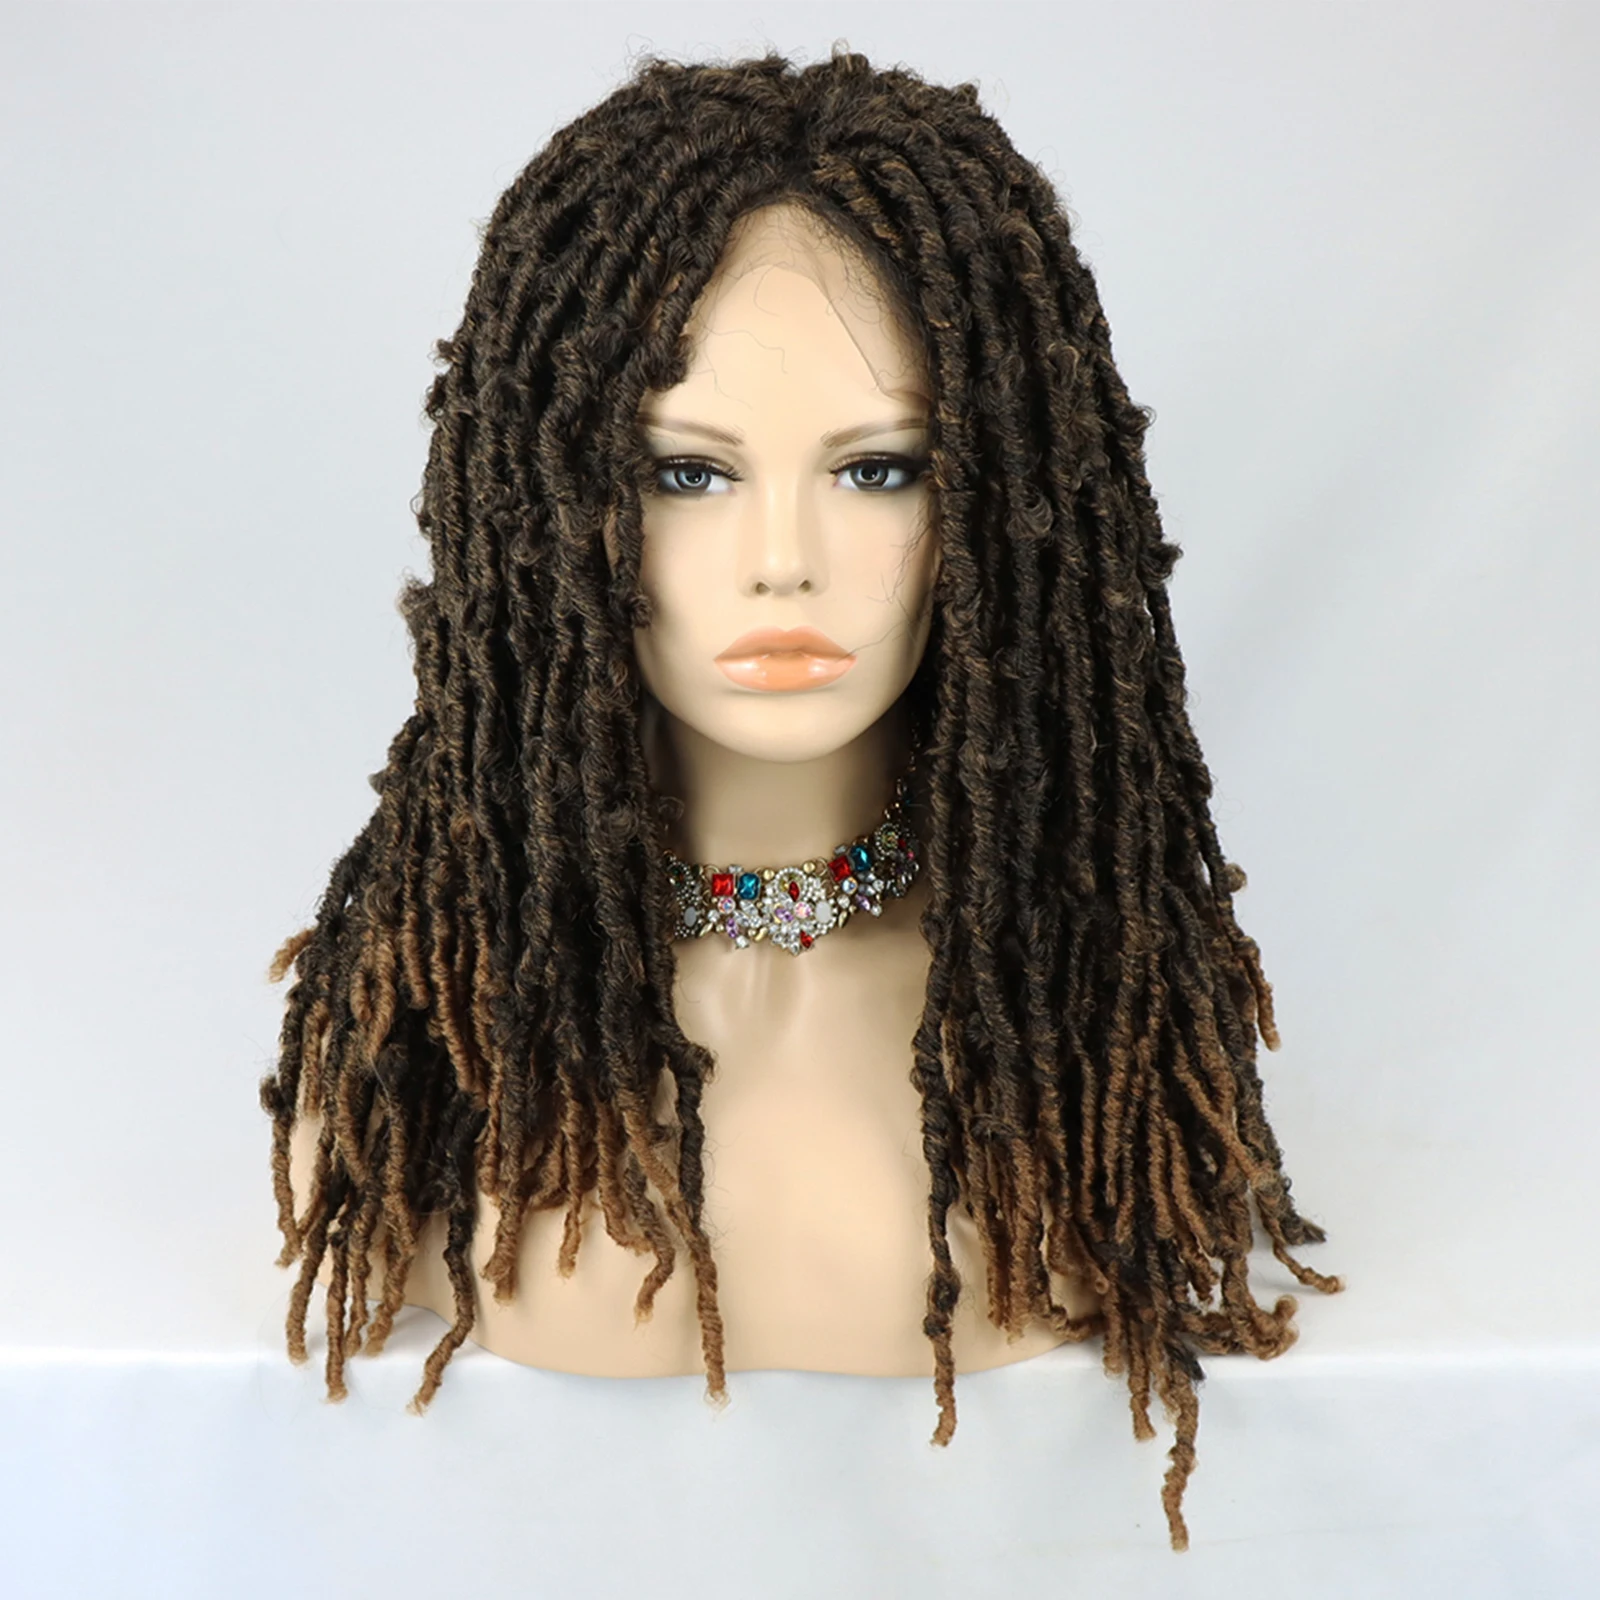 New Butterfly Locs Crochet Synthetic Hair Lace Front Wigs 1B Brown Color Faux Locs 14 18inch Long Dreadlocks Hair Wigs for Women